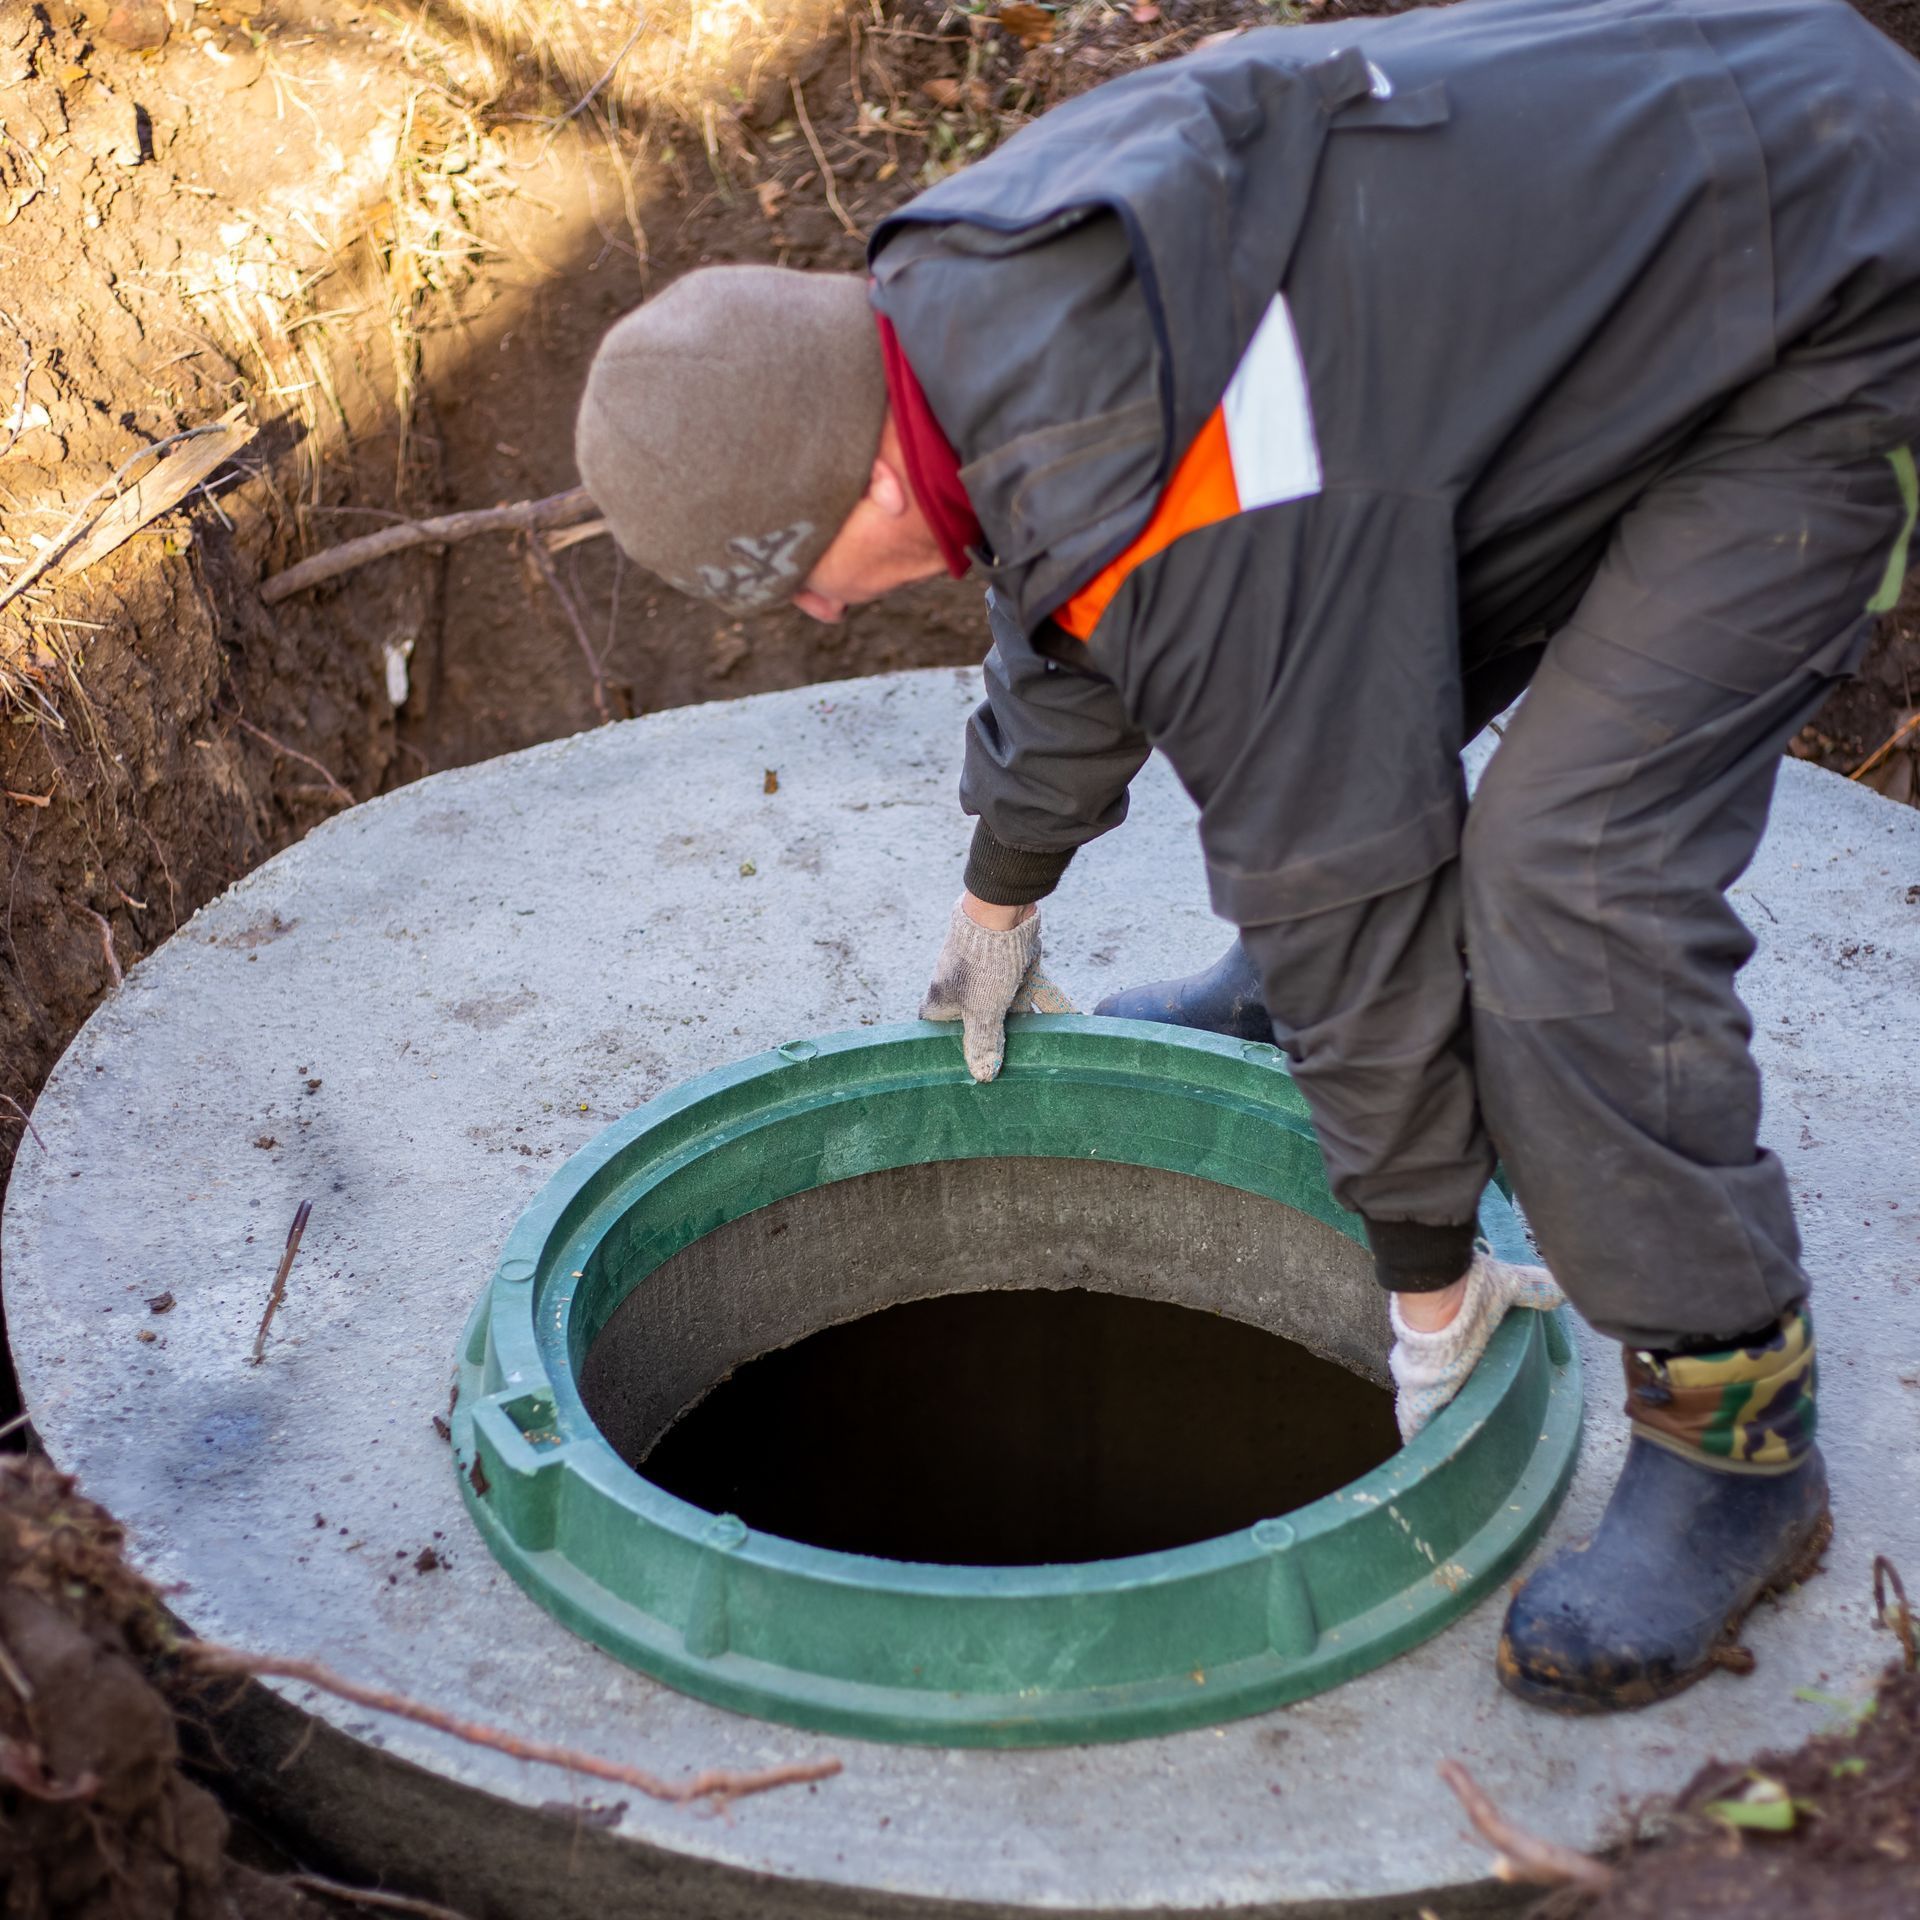 a person is using a level to measure a hole in the ground